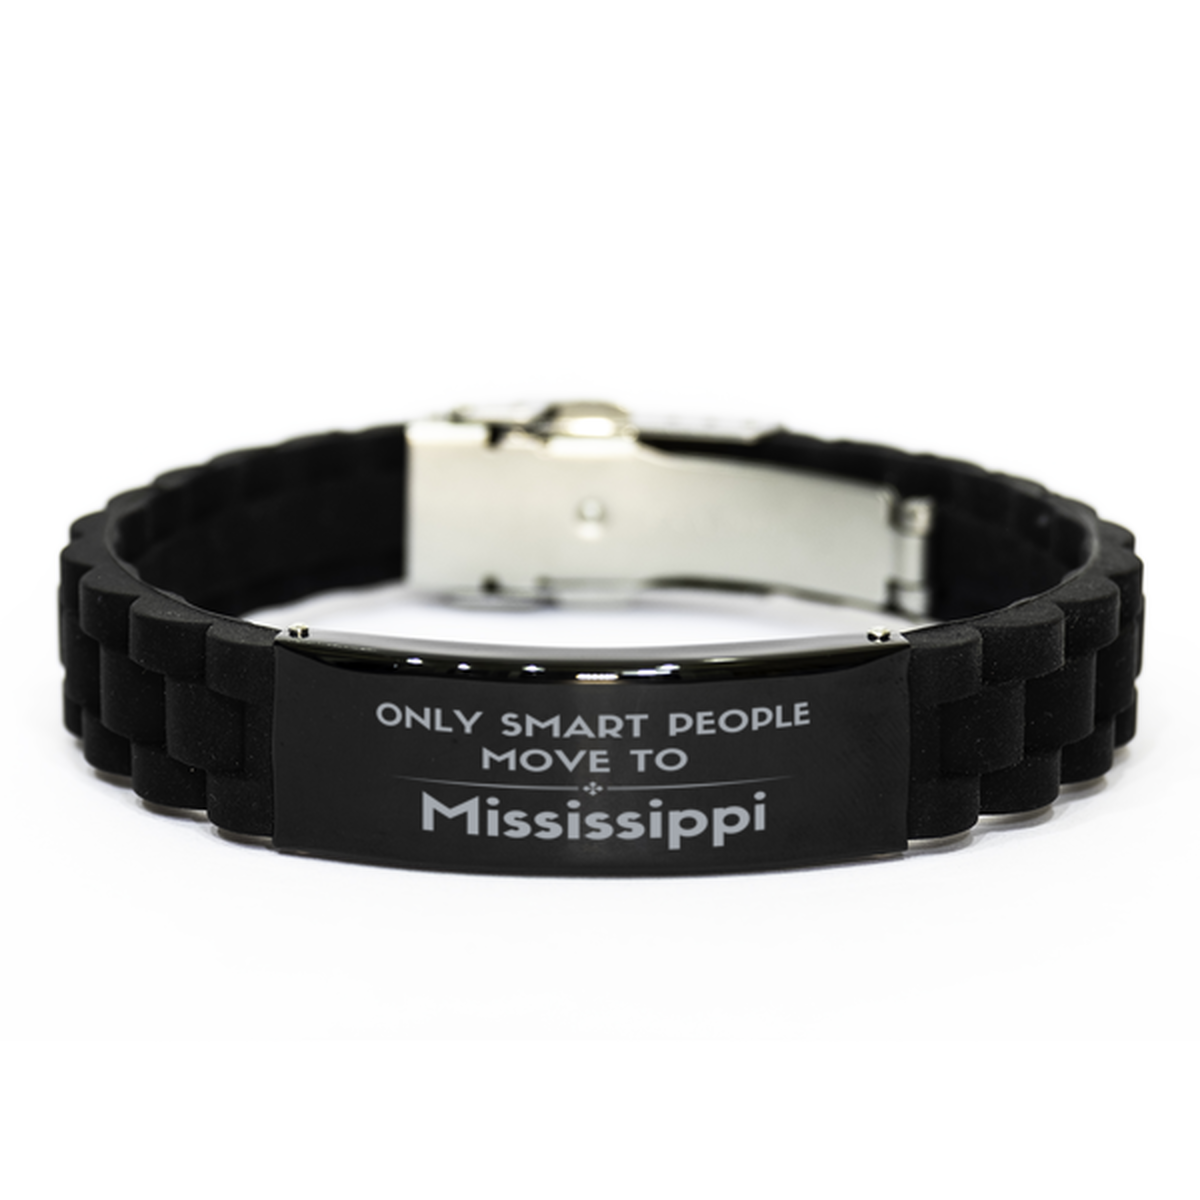 Only smart people move to Mississippi Black Glidelock Clasp Bracelet, Gag Gifts For Mississippi, Move to Mississippi Gifts for Friends Coworker Funny Saying Quote